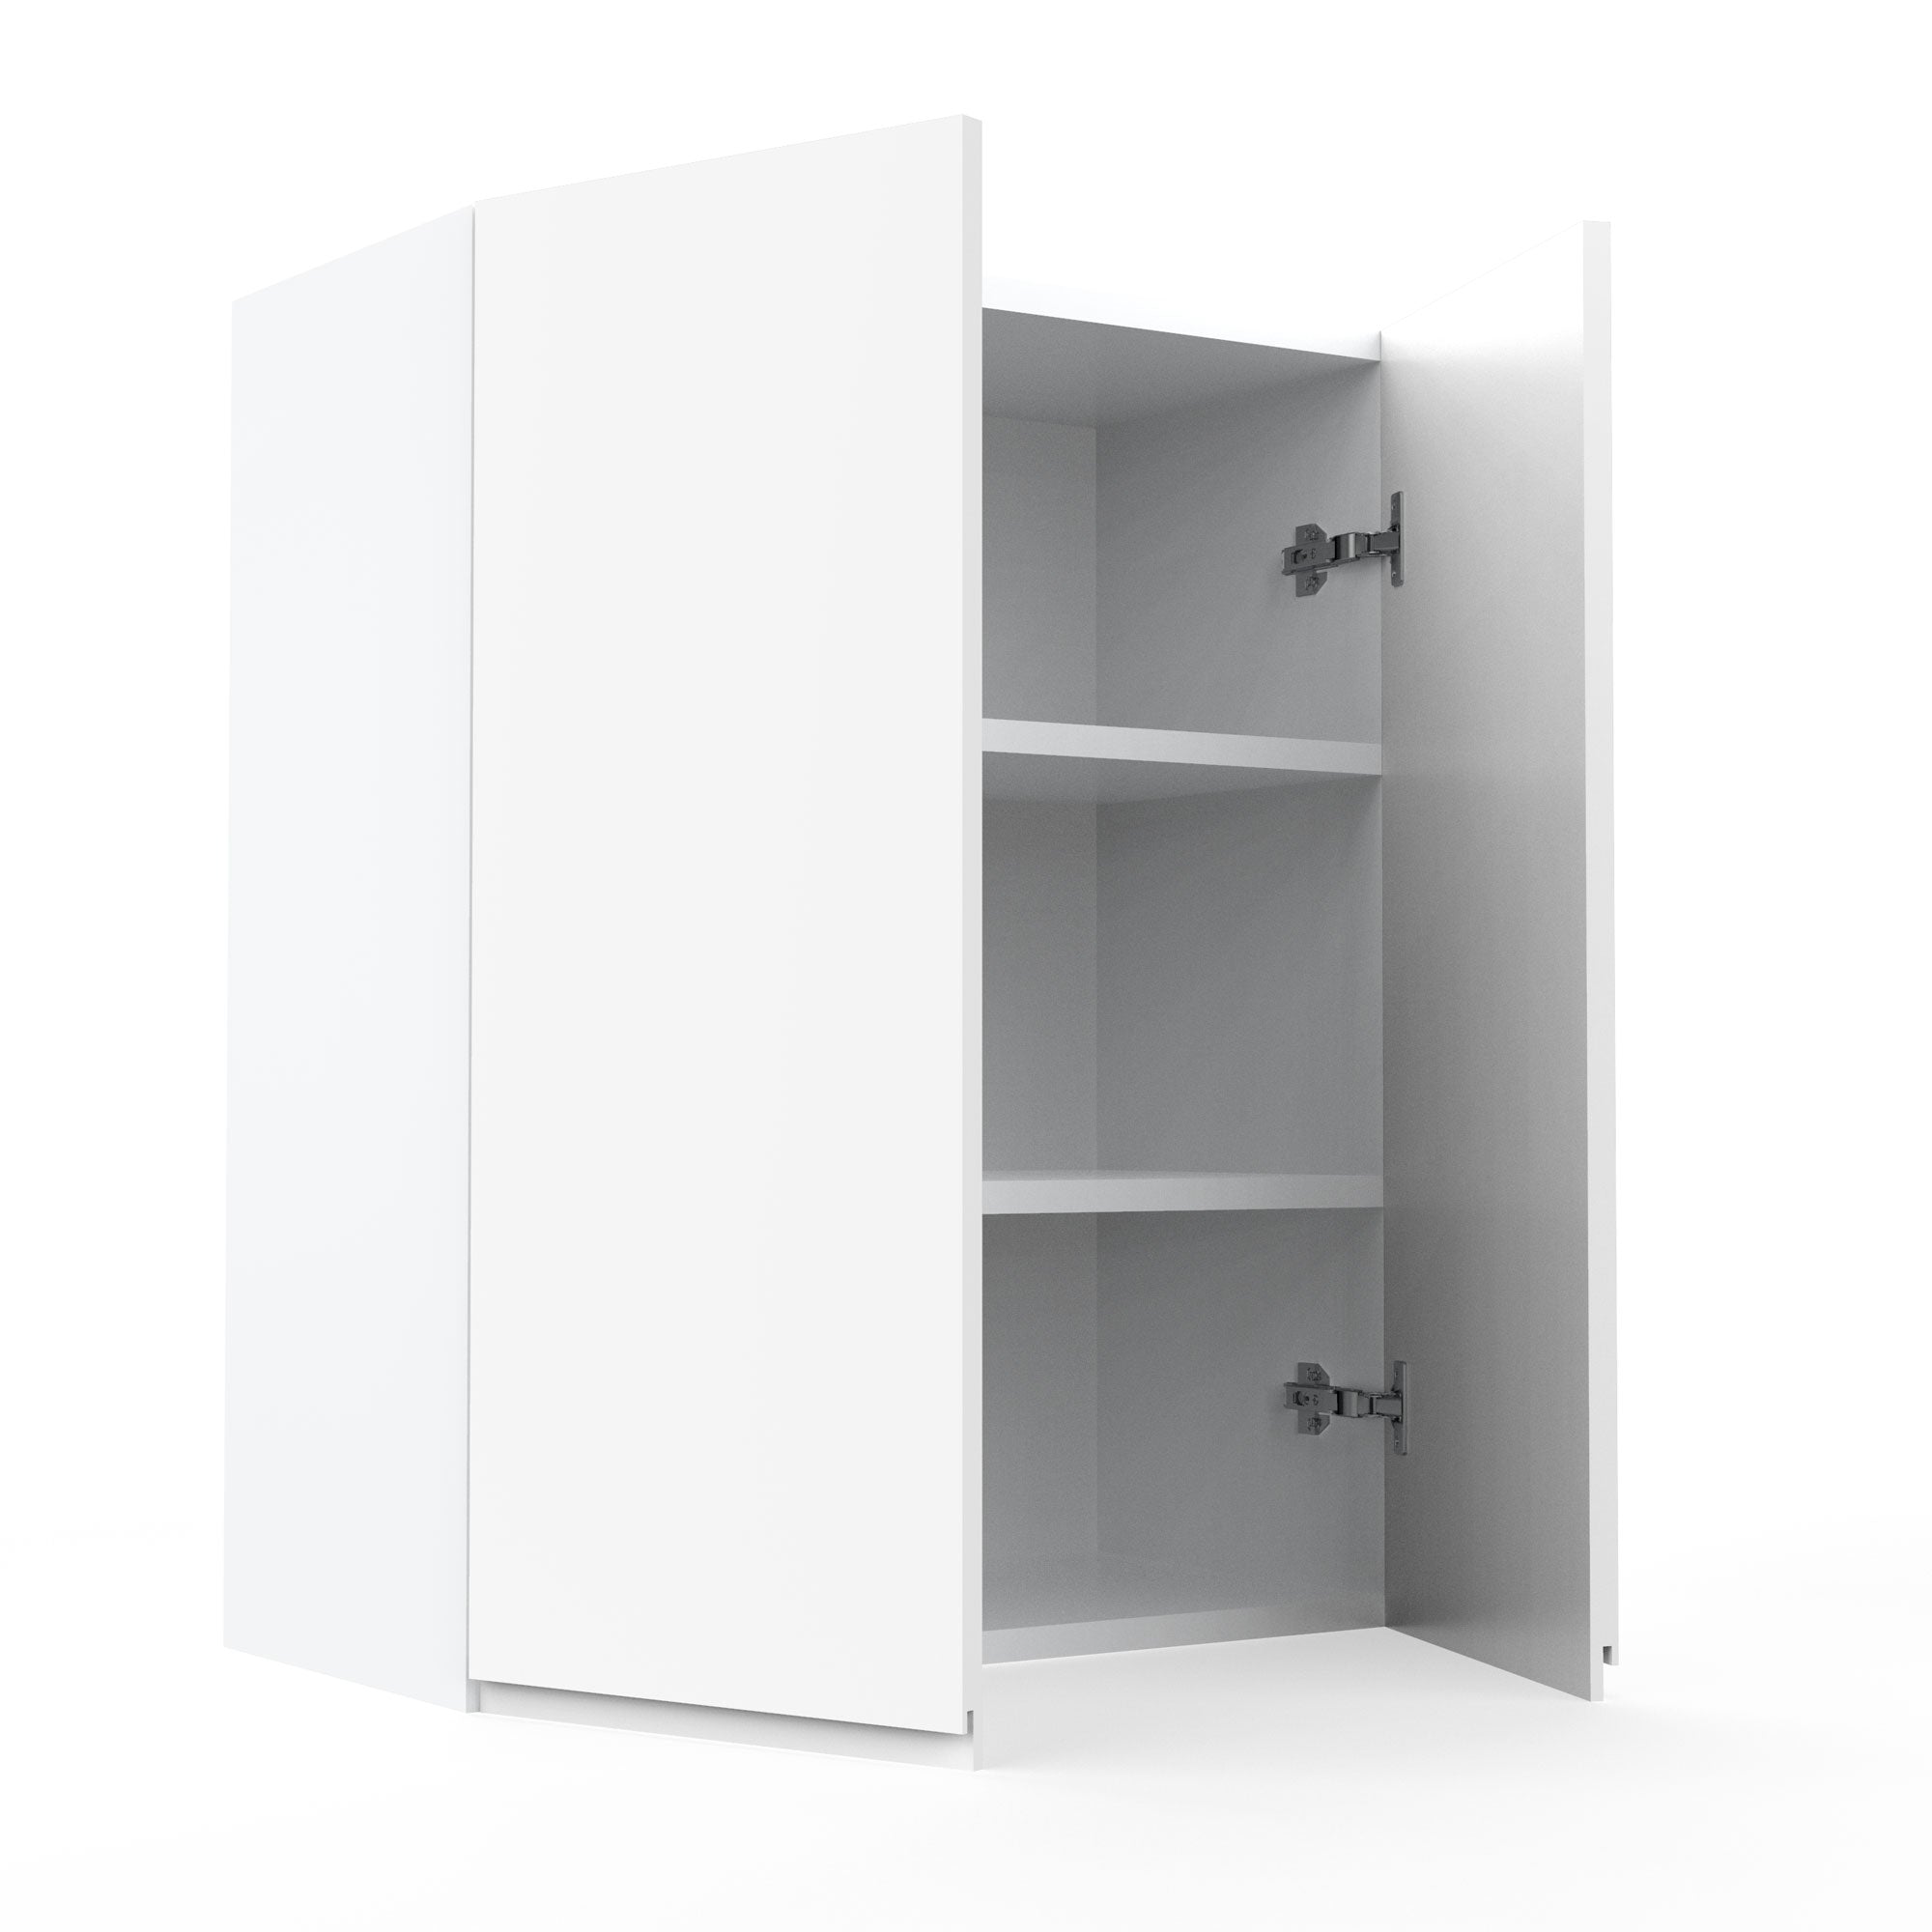 RTA - Lacquer White - Double Door Wall Cabinet | 24"W x 30"H x 12"D